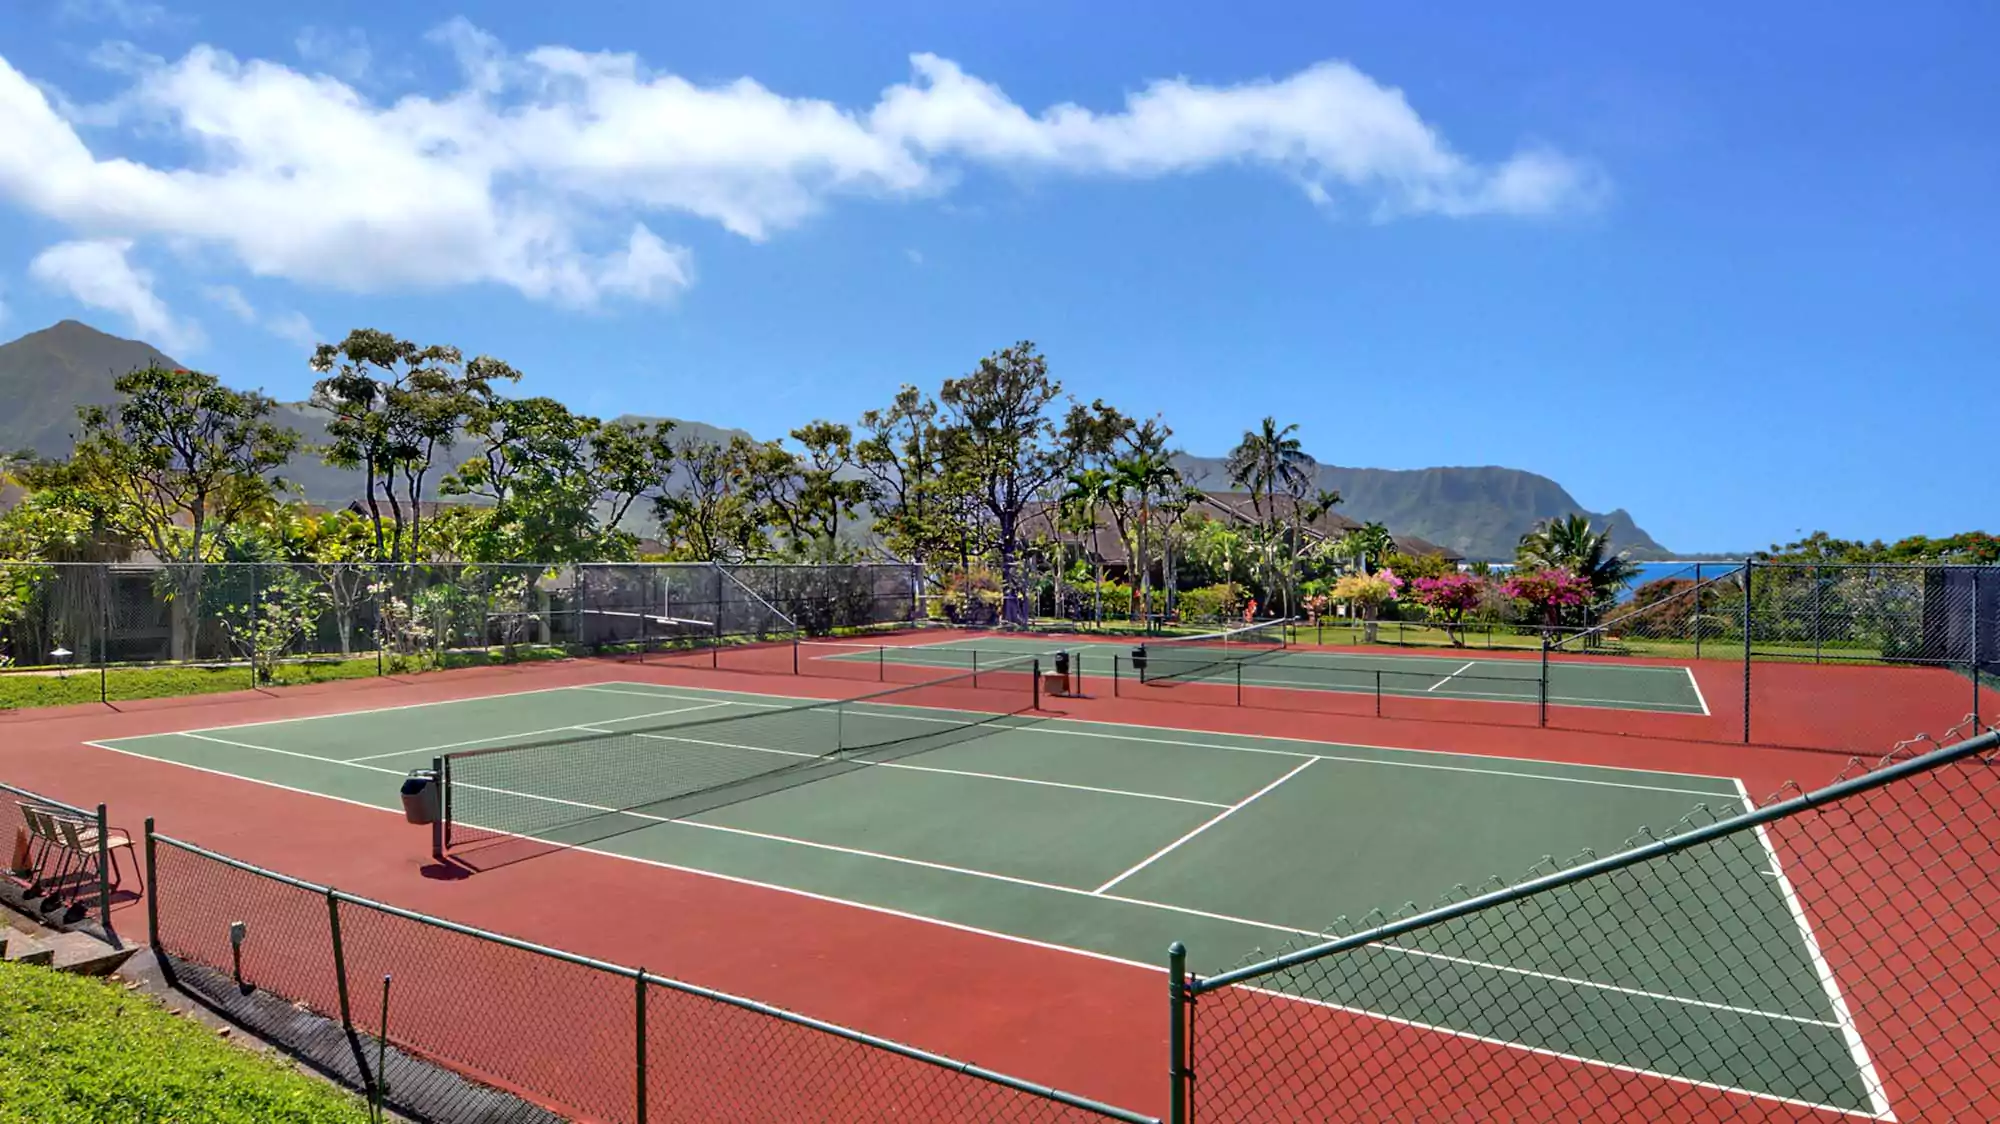 Hard tennis courts on a sunny day